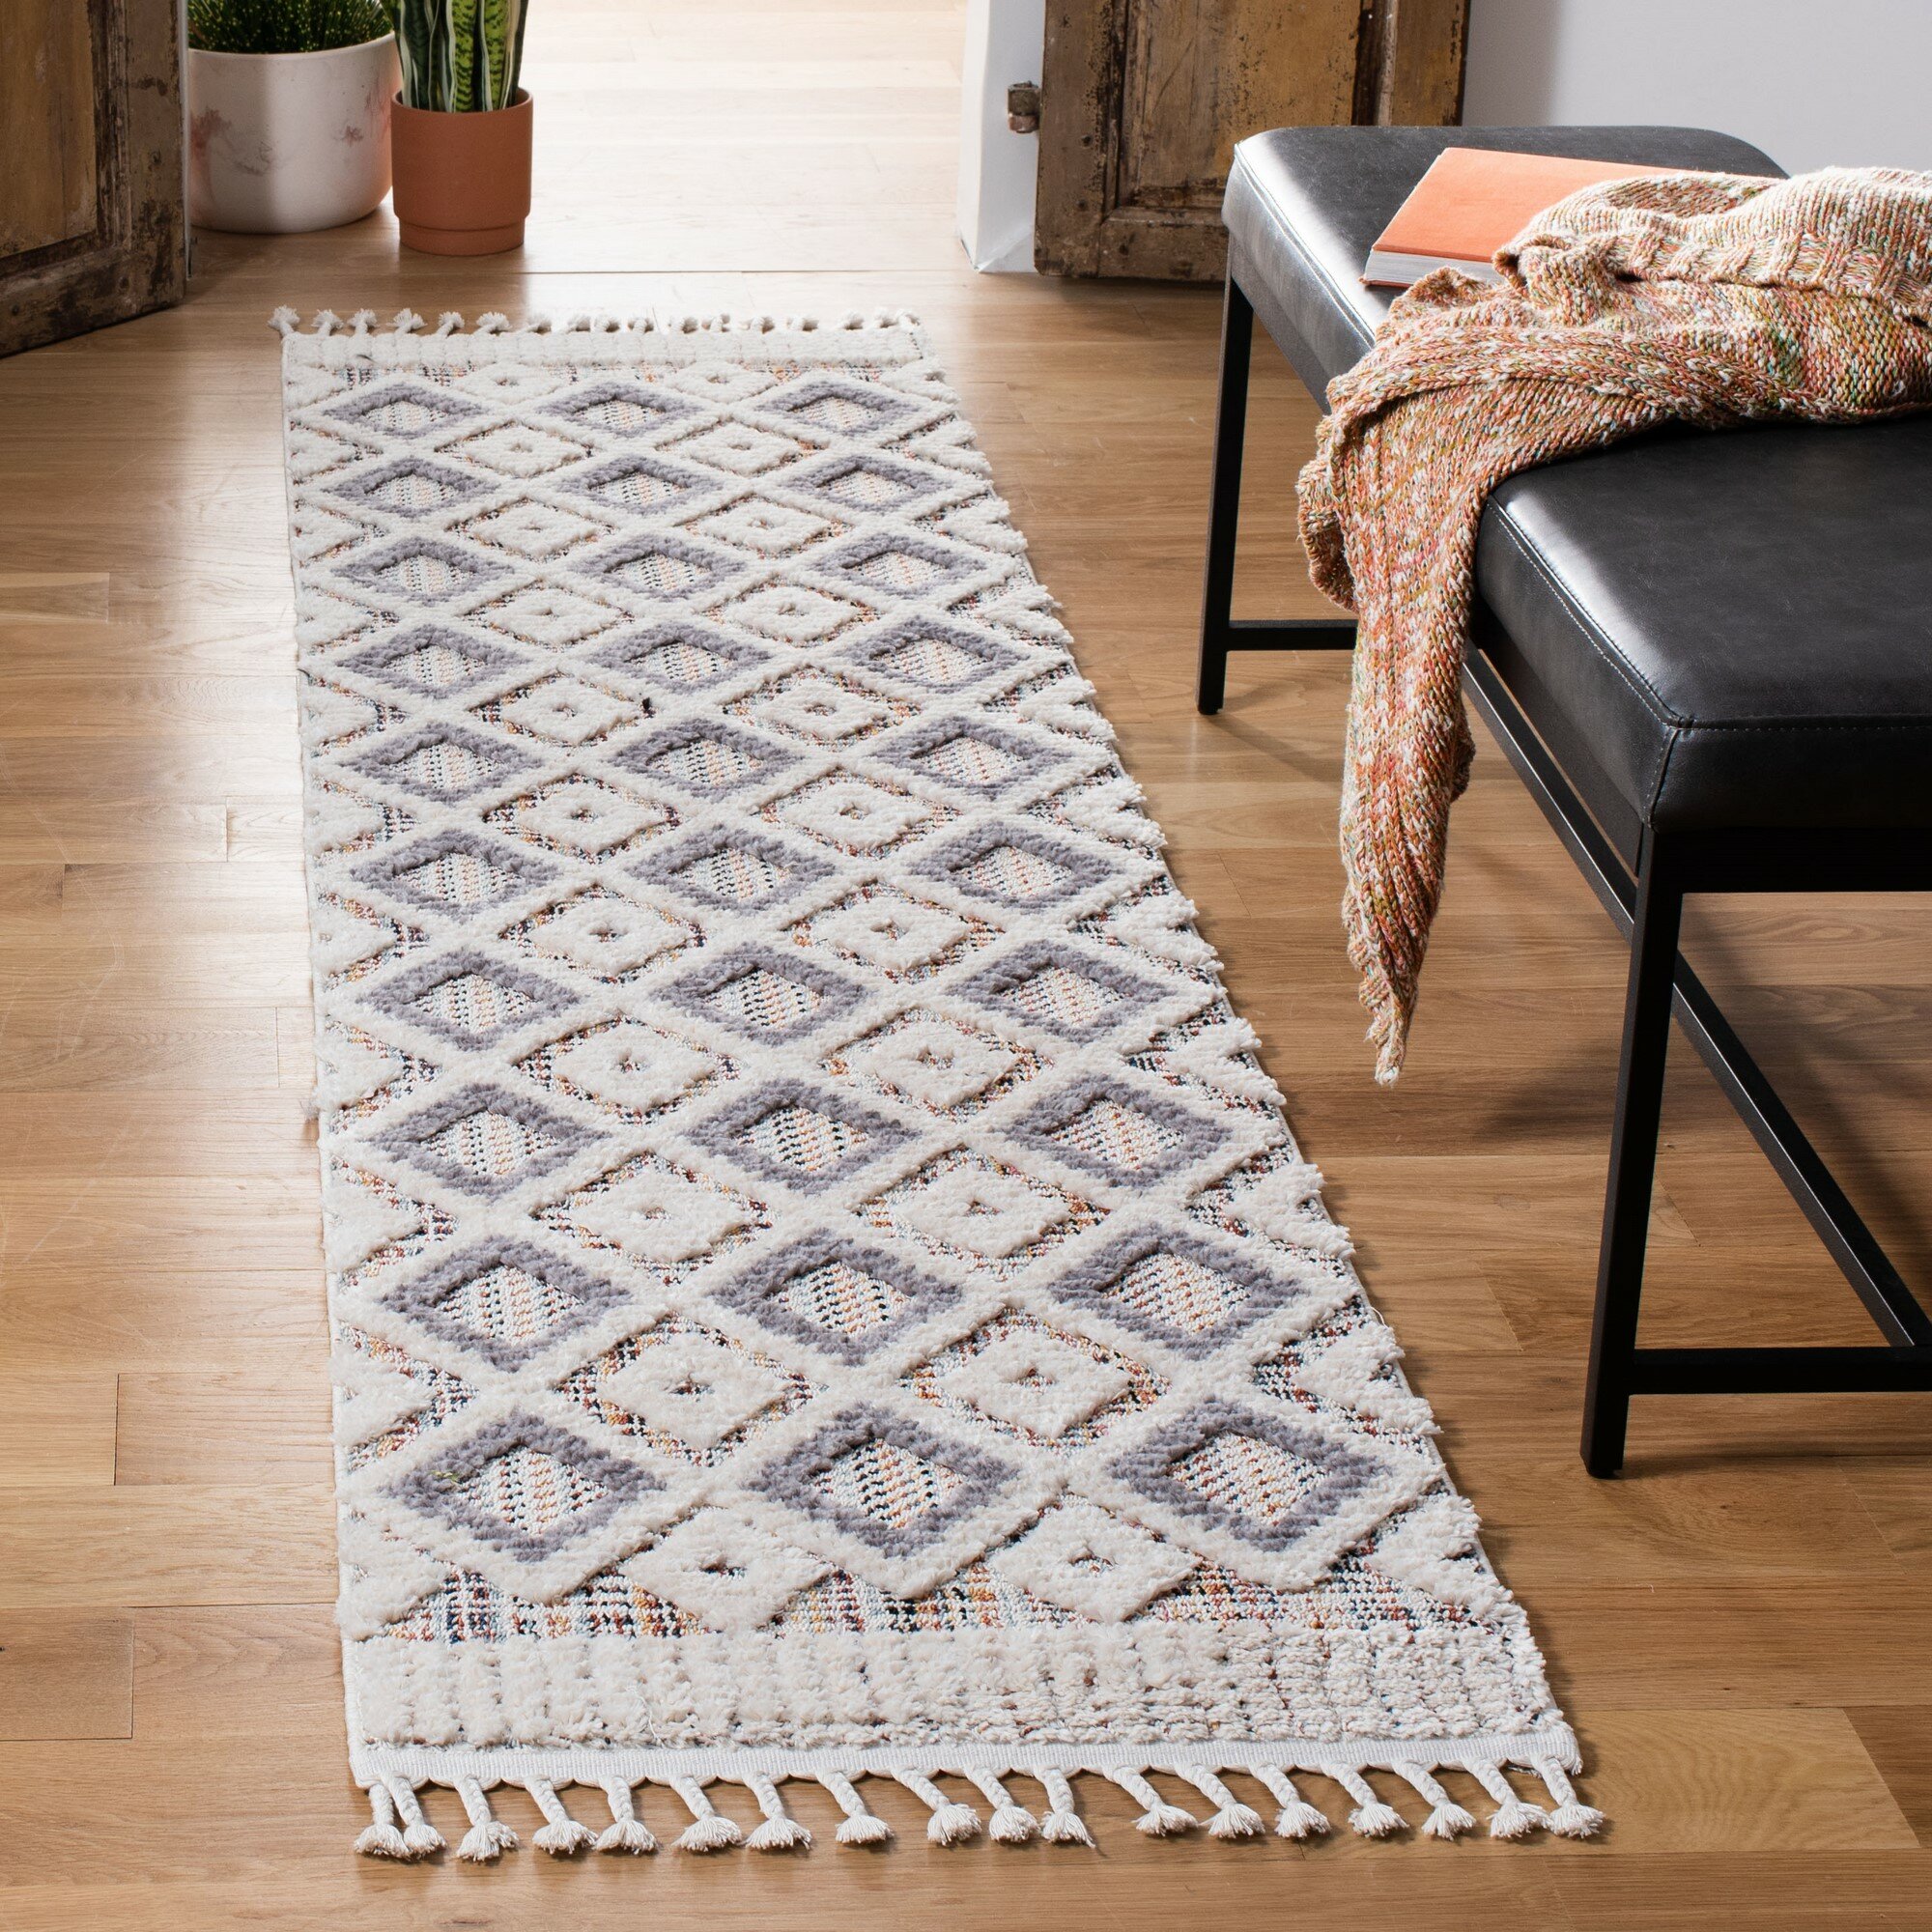 DISCOUNTED Soft Grey Shaggy Rugs Thick Pile Non Shed Geometric Dining Room Rug 